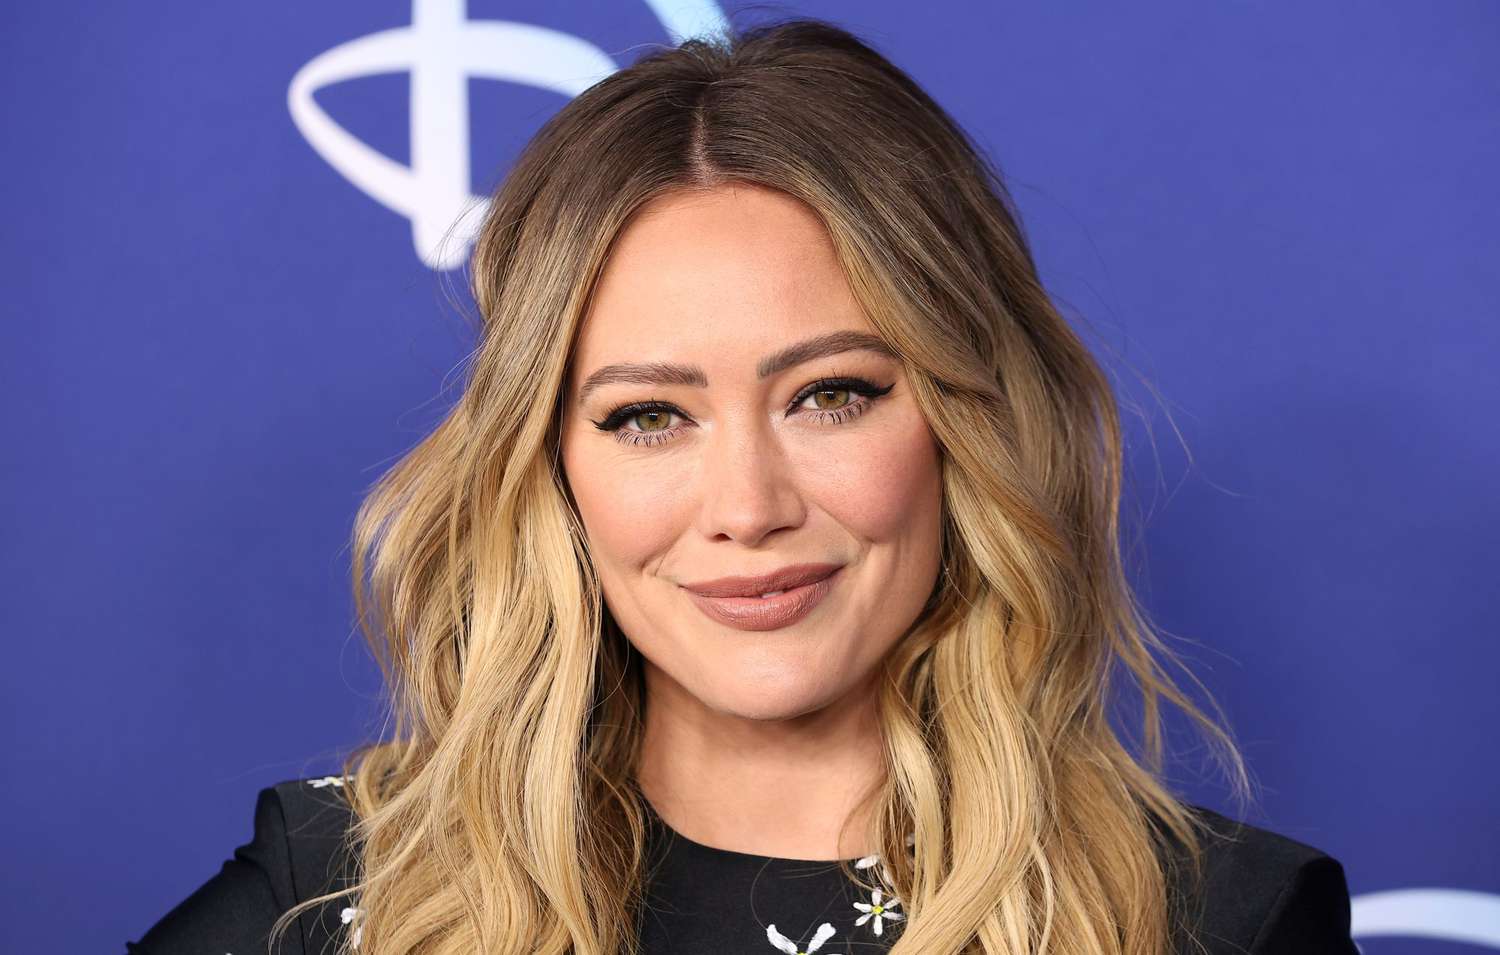 Hilary Duff's Silk Button-Down Is an Elevated Way to Wear the Classic Shirt Celebs Always Return To